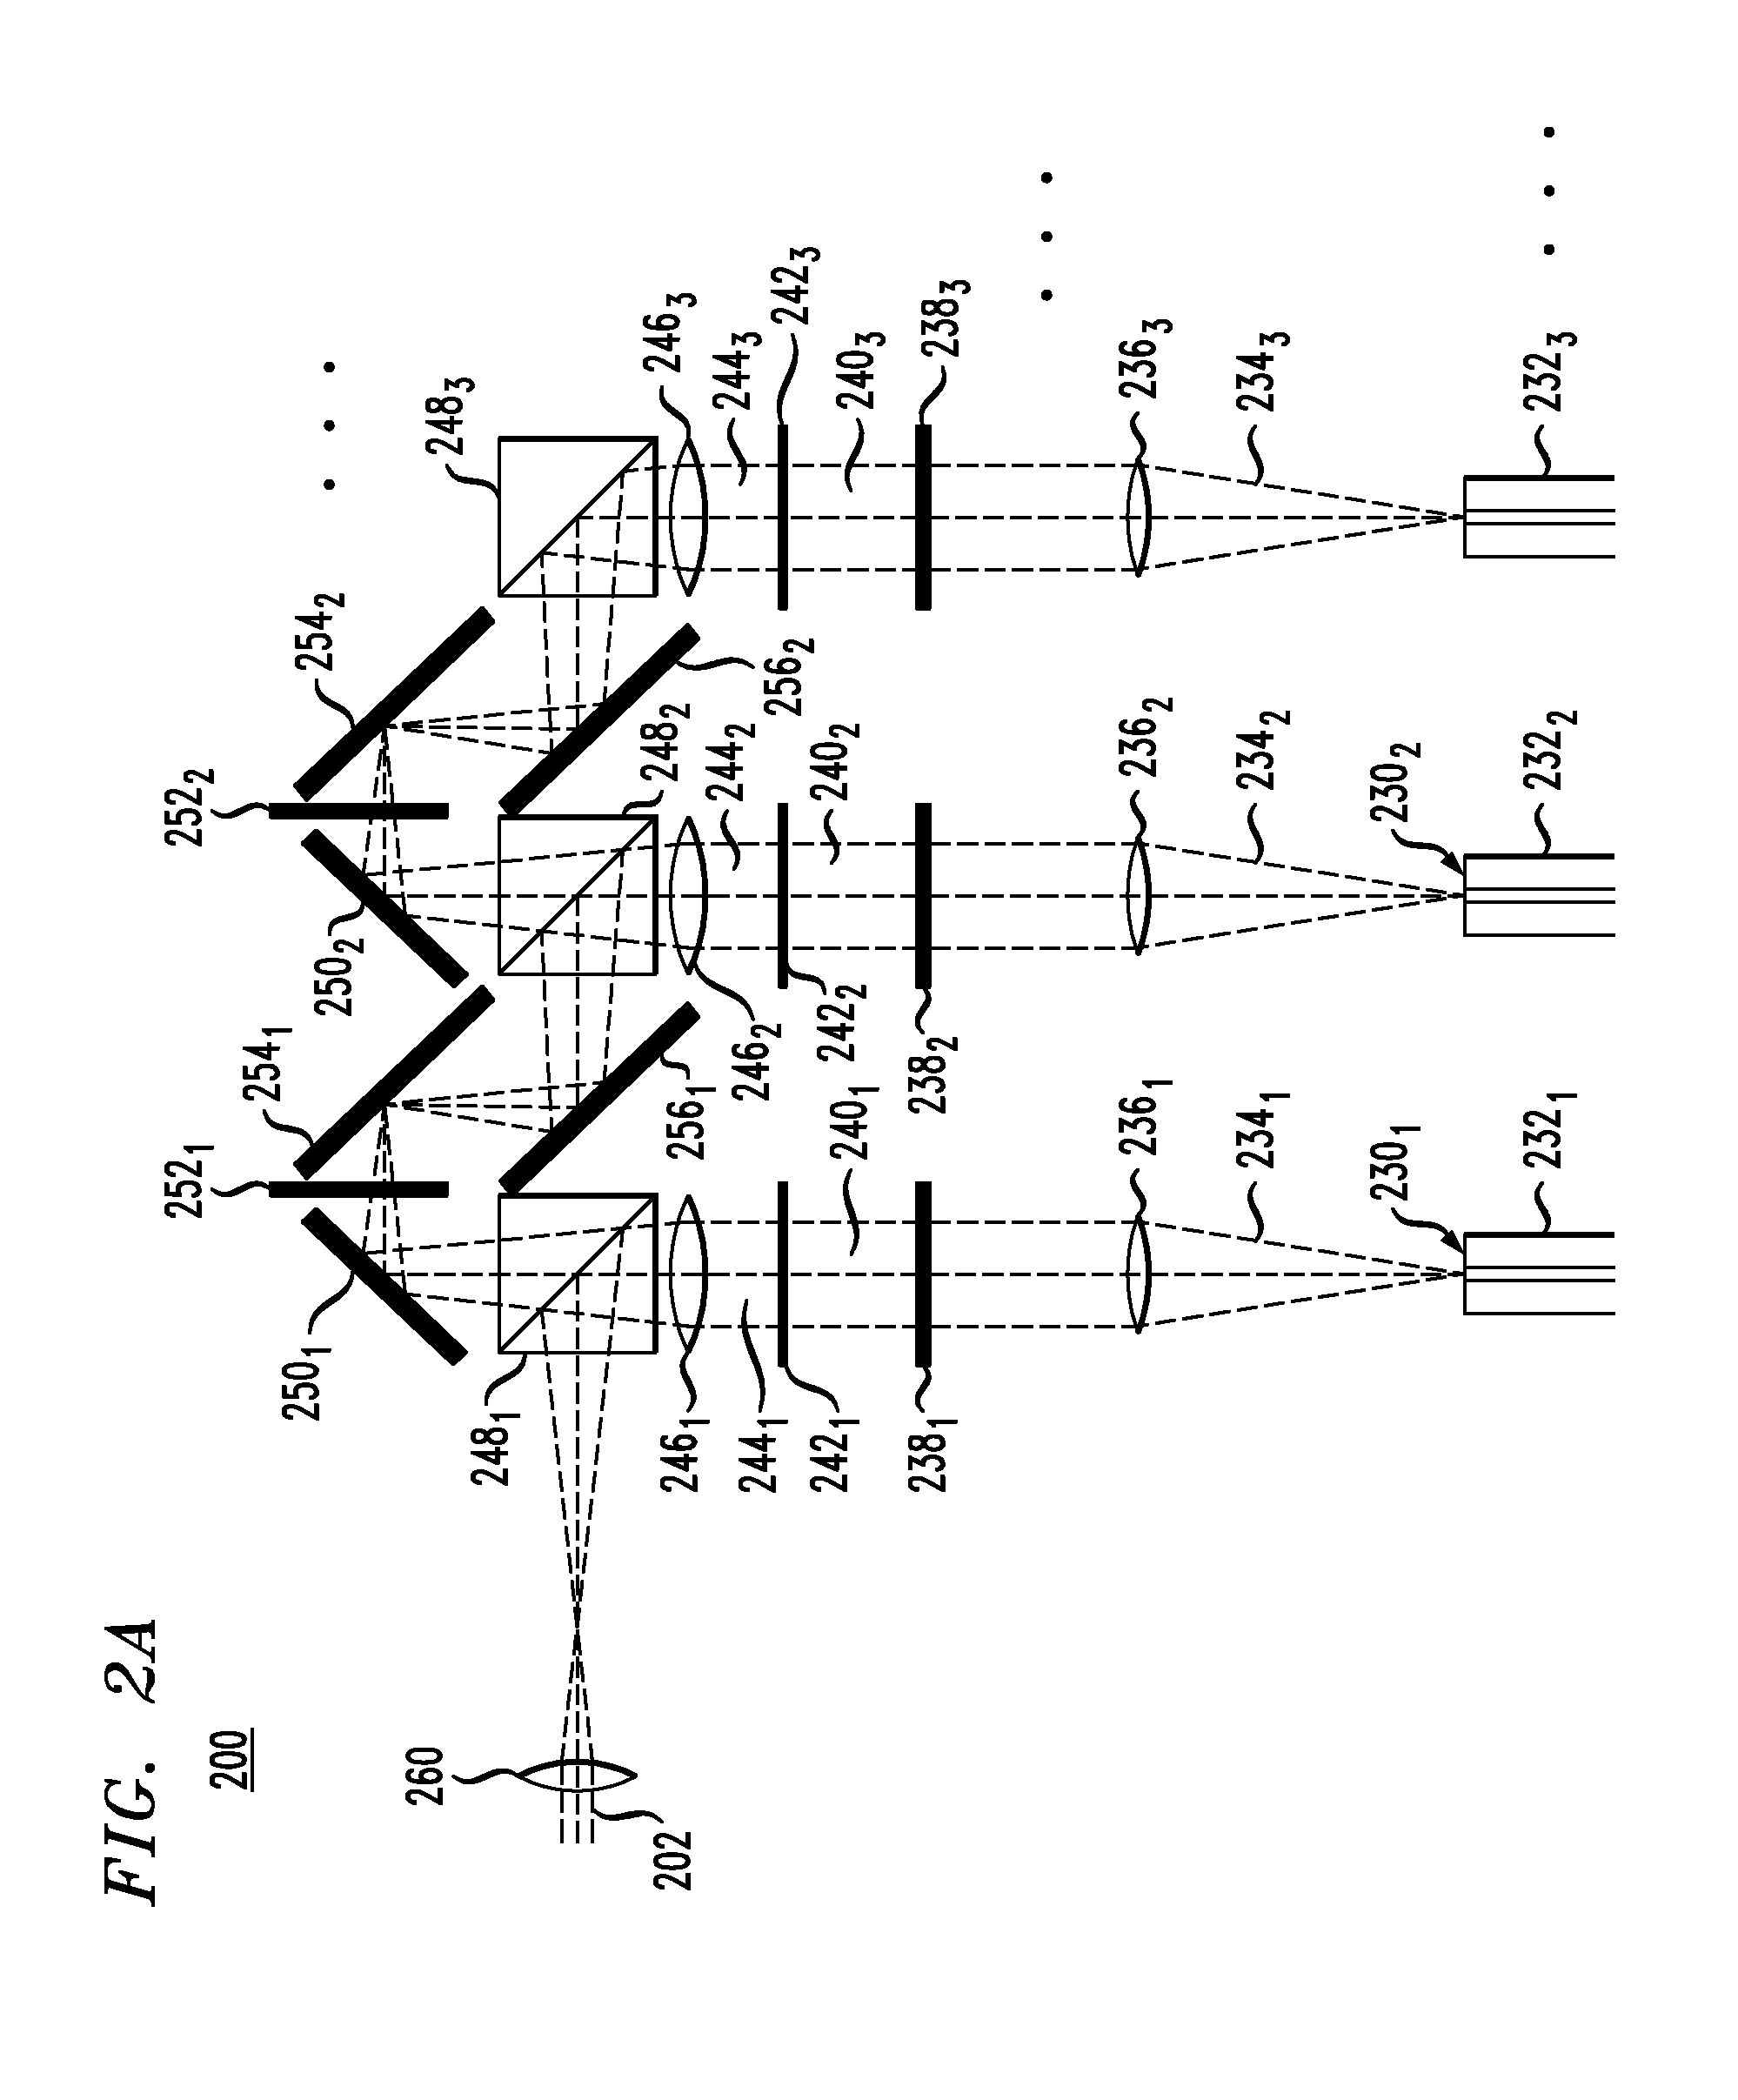 Scalable waveguide-mode coupler for an optical receiver or transmitter